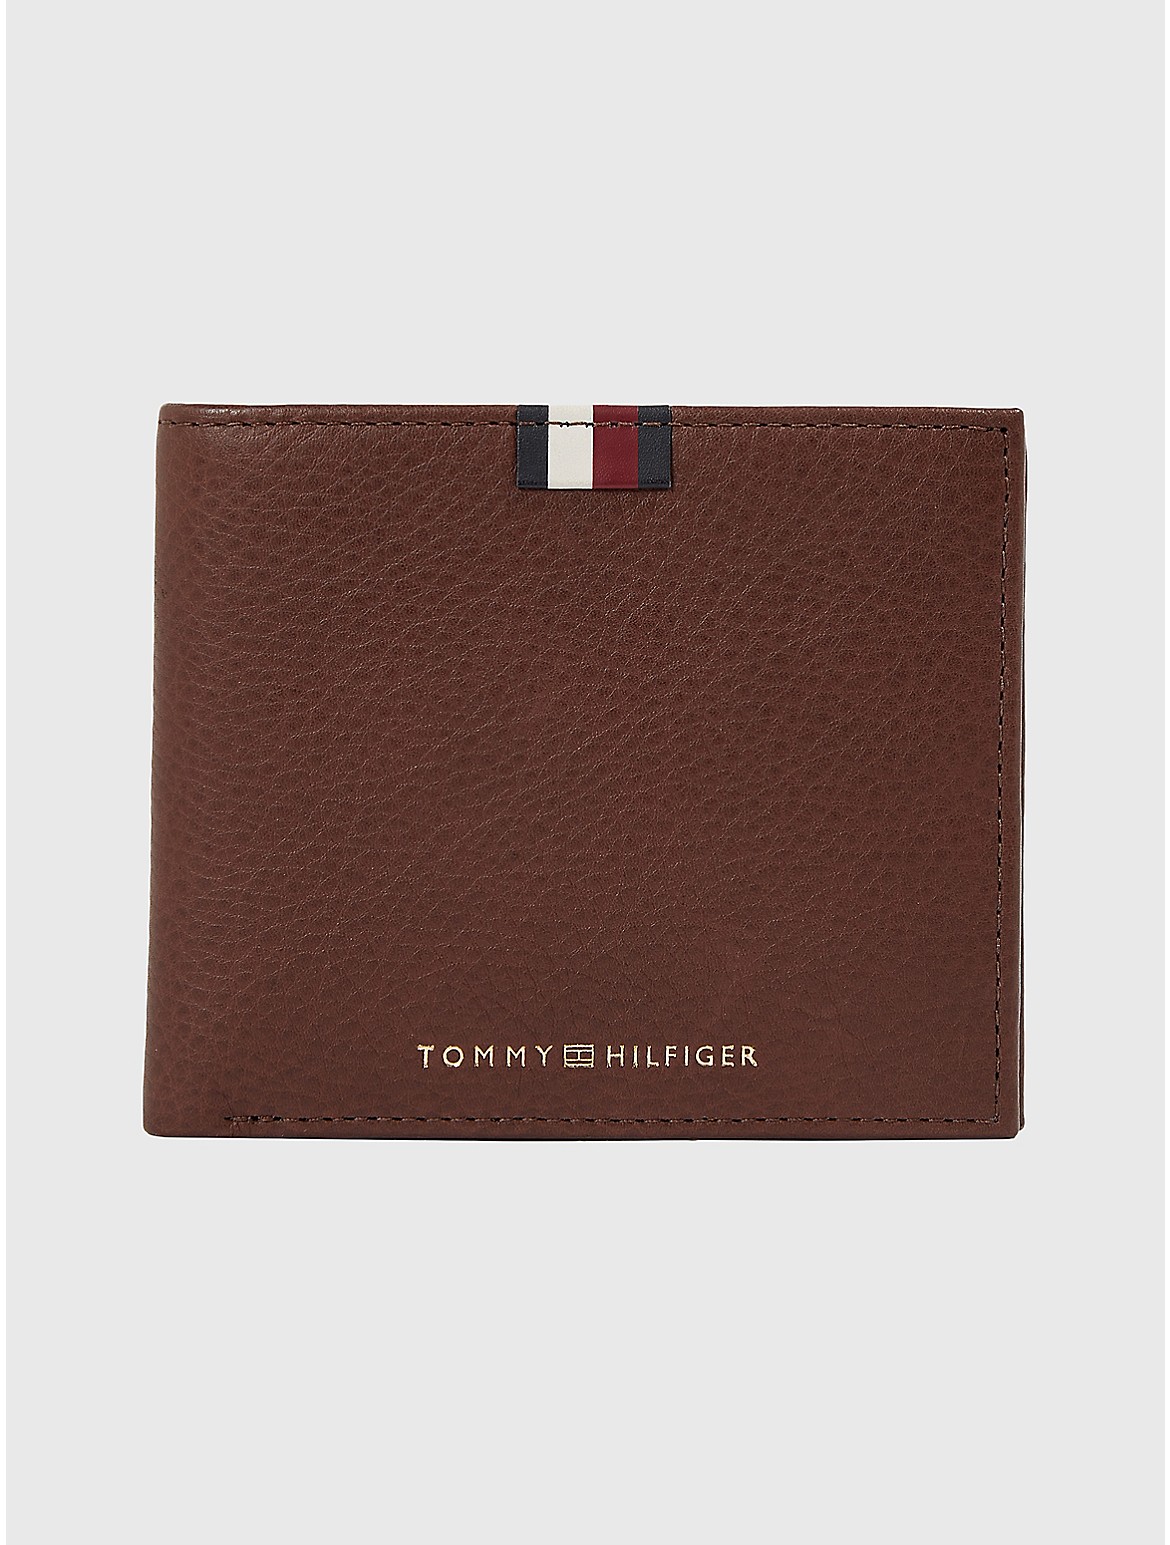 Tommy Hilfiger Men's Logo Leather Wallet with Coin Pocket - Brown